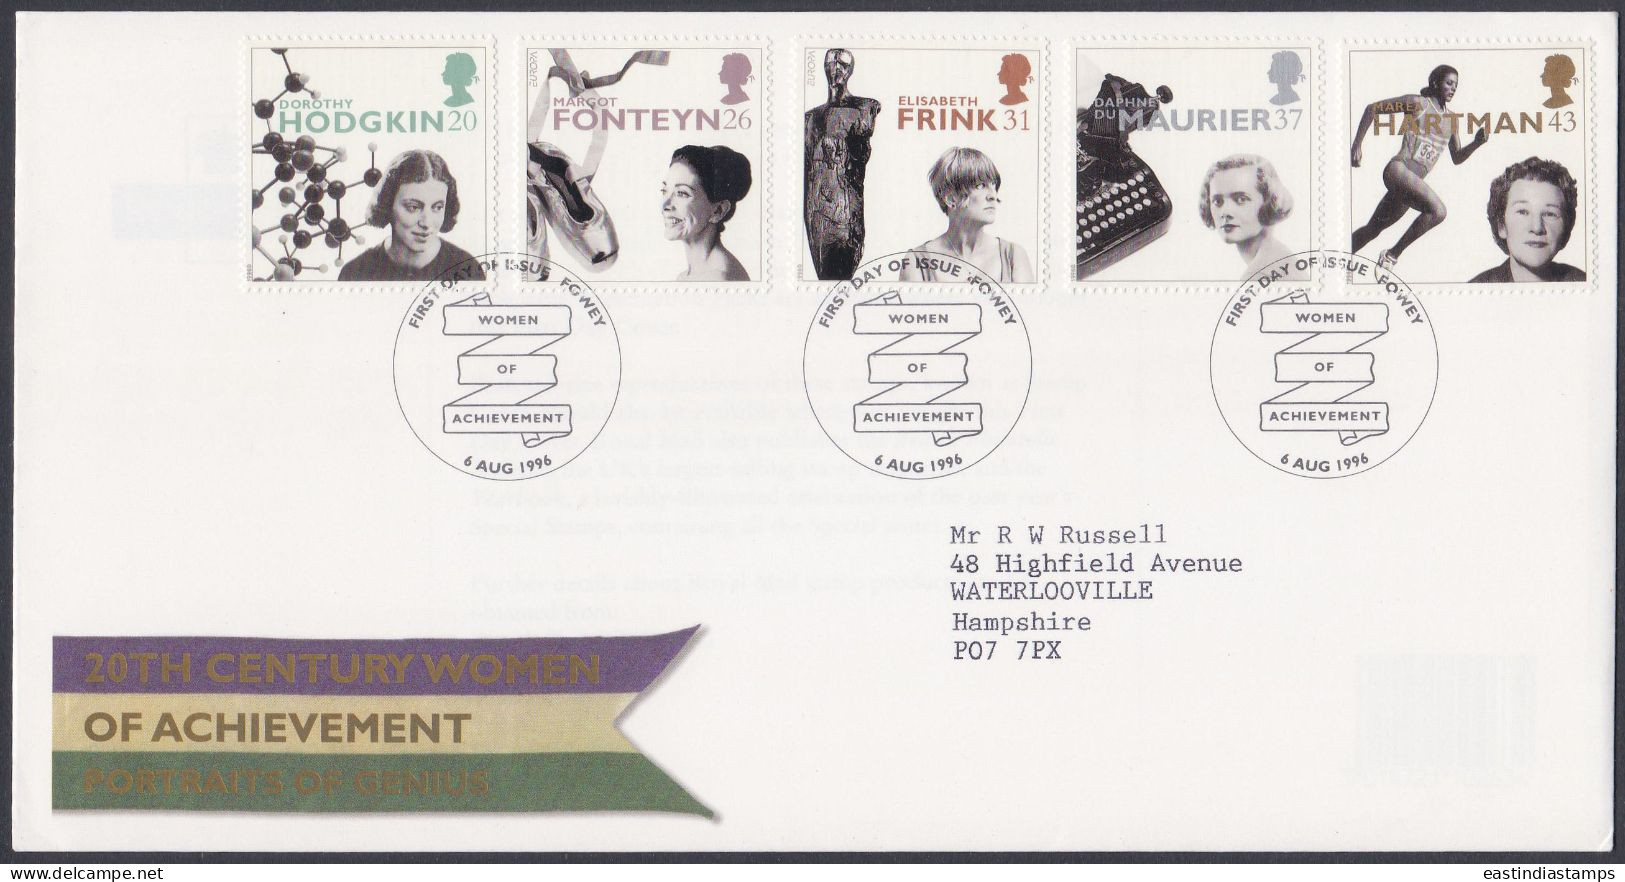 GB Great Britain 1996 FDC Women, Ballet, Science, Cinema, Typewriter, Sports, Pictorial Postmark, First Day Cover - Lettres & Documents